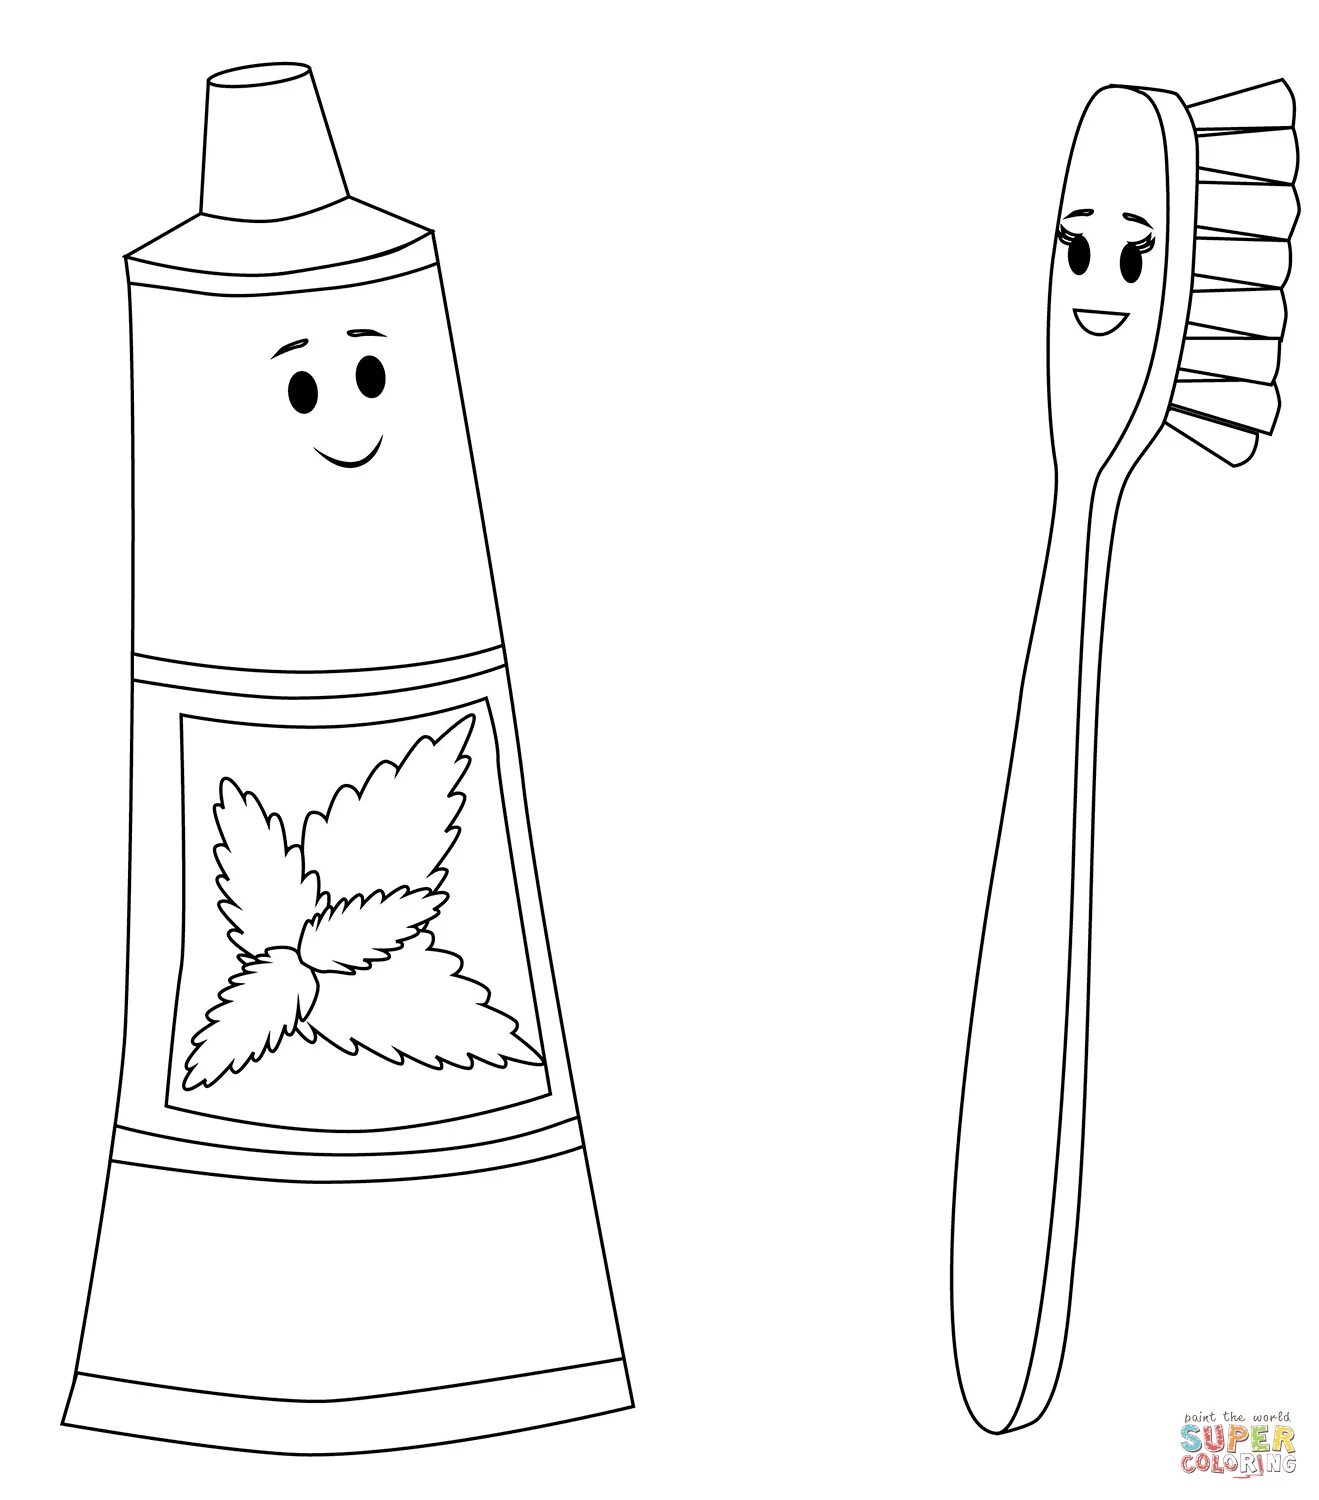 Children's toothbrush and paste #21